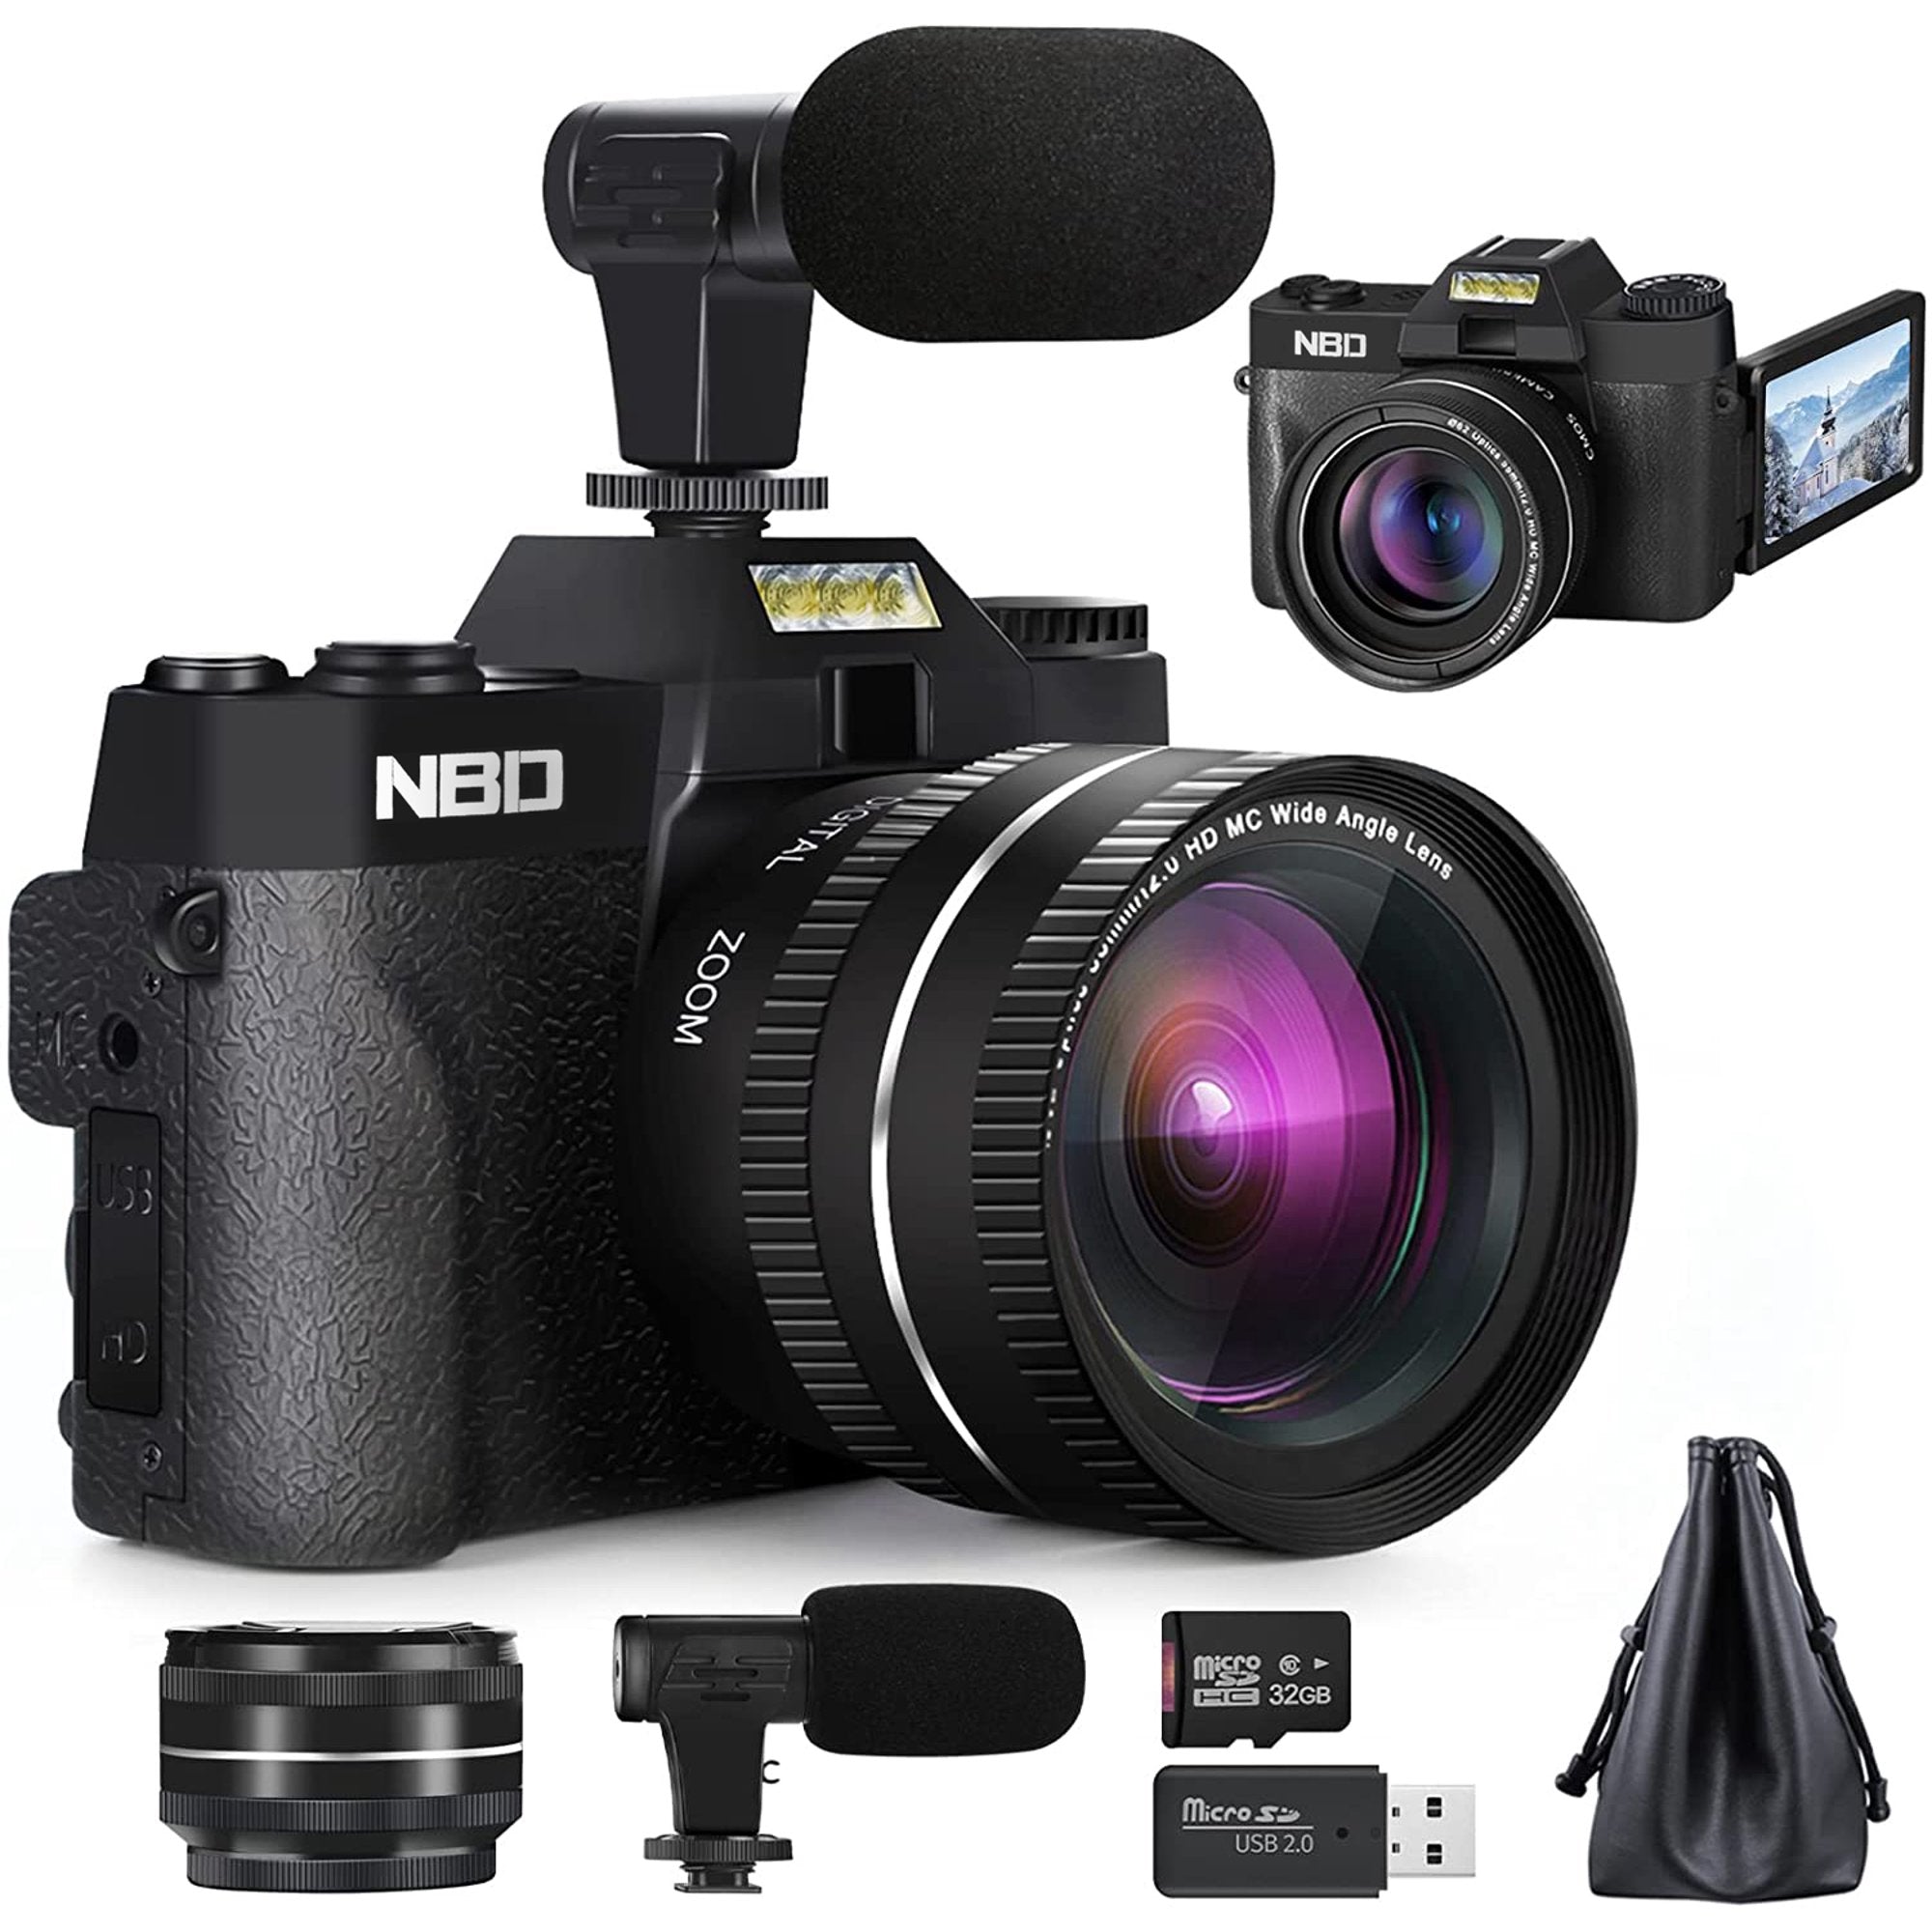 Digital Camera, 4K Video NBD Camera for YouTube with WiFi, 3.0" Flip Screen, Wide Angle Lens, Macro Lens, 16X Zoom